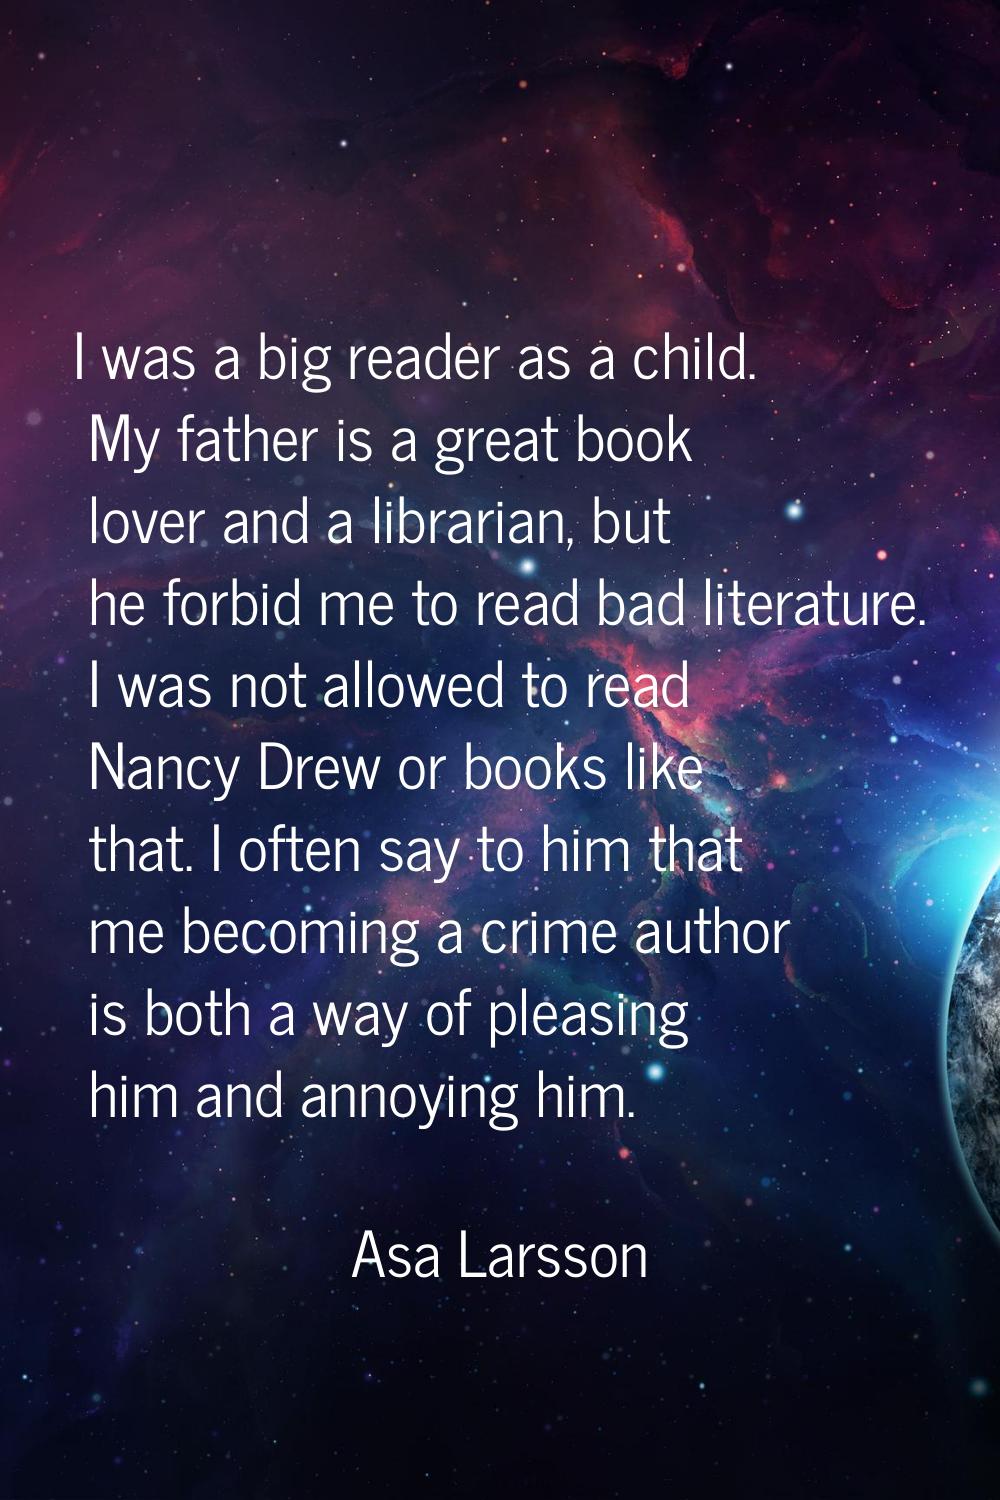 I was a big reader as a child. My father is a great book lover and a librarian, but he forbid me to